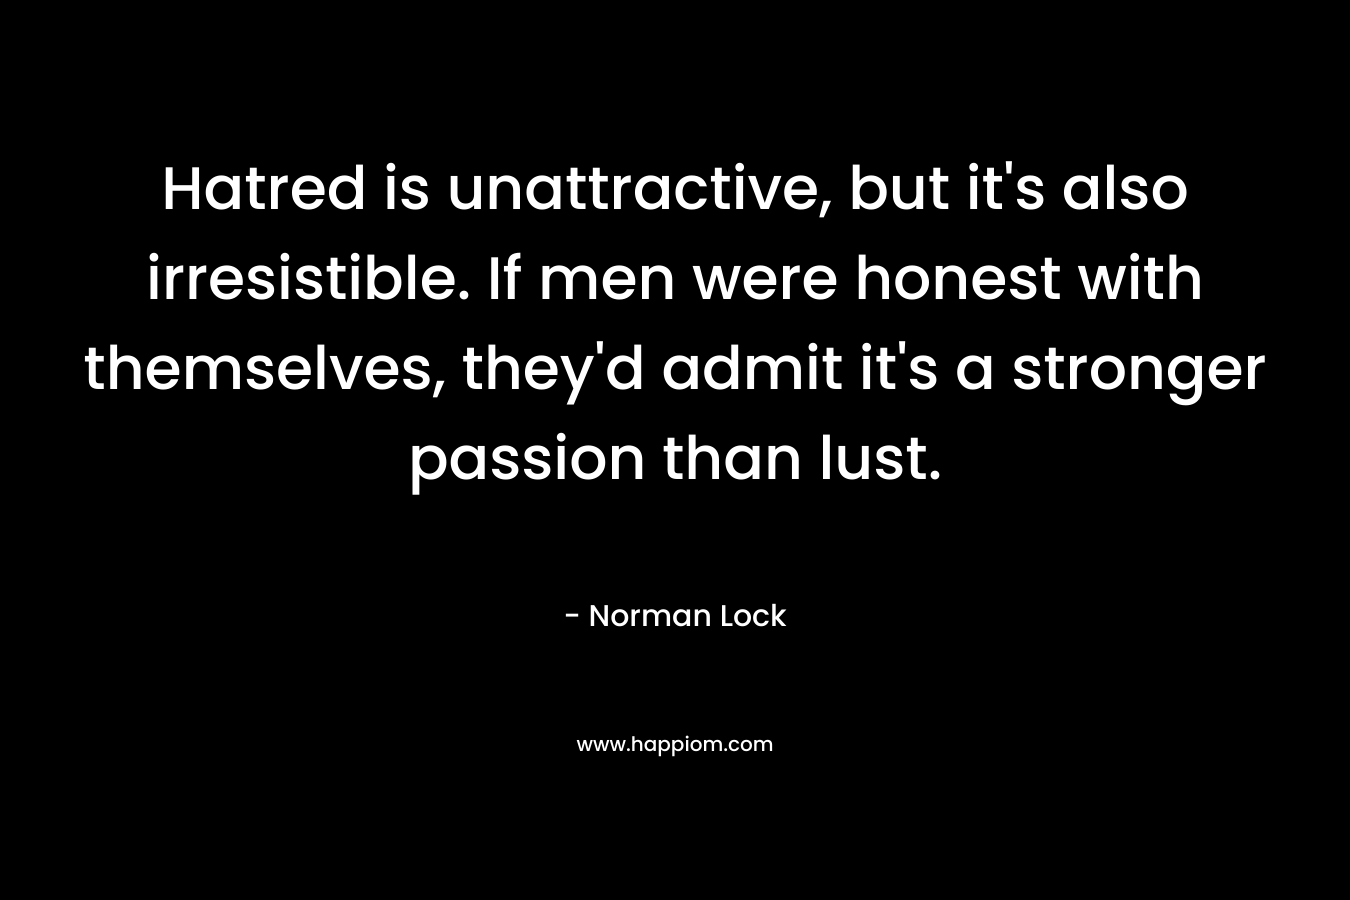 Hatred is unattractive, but it’s also irresistible. If men were honest with themselves, they’d admit it’s a stronger passion than lust. – Norman Lock